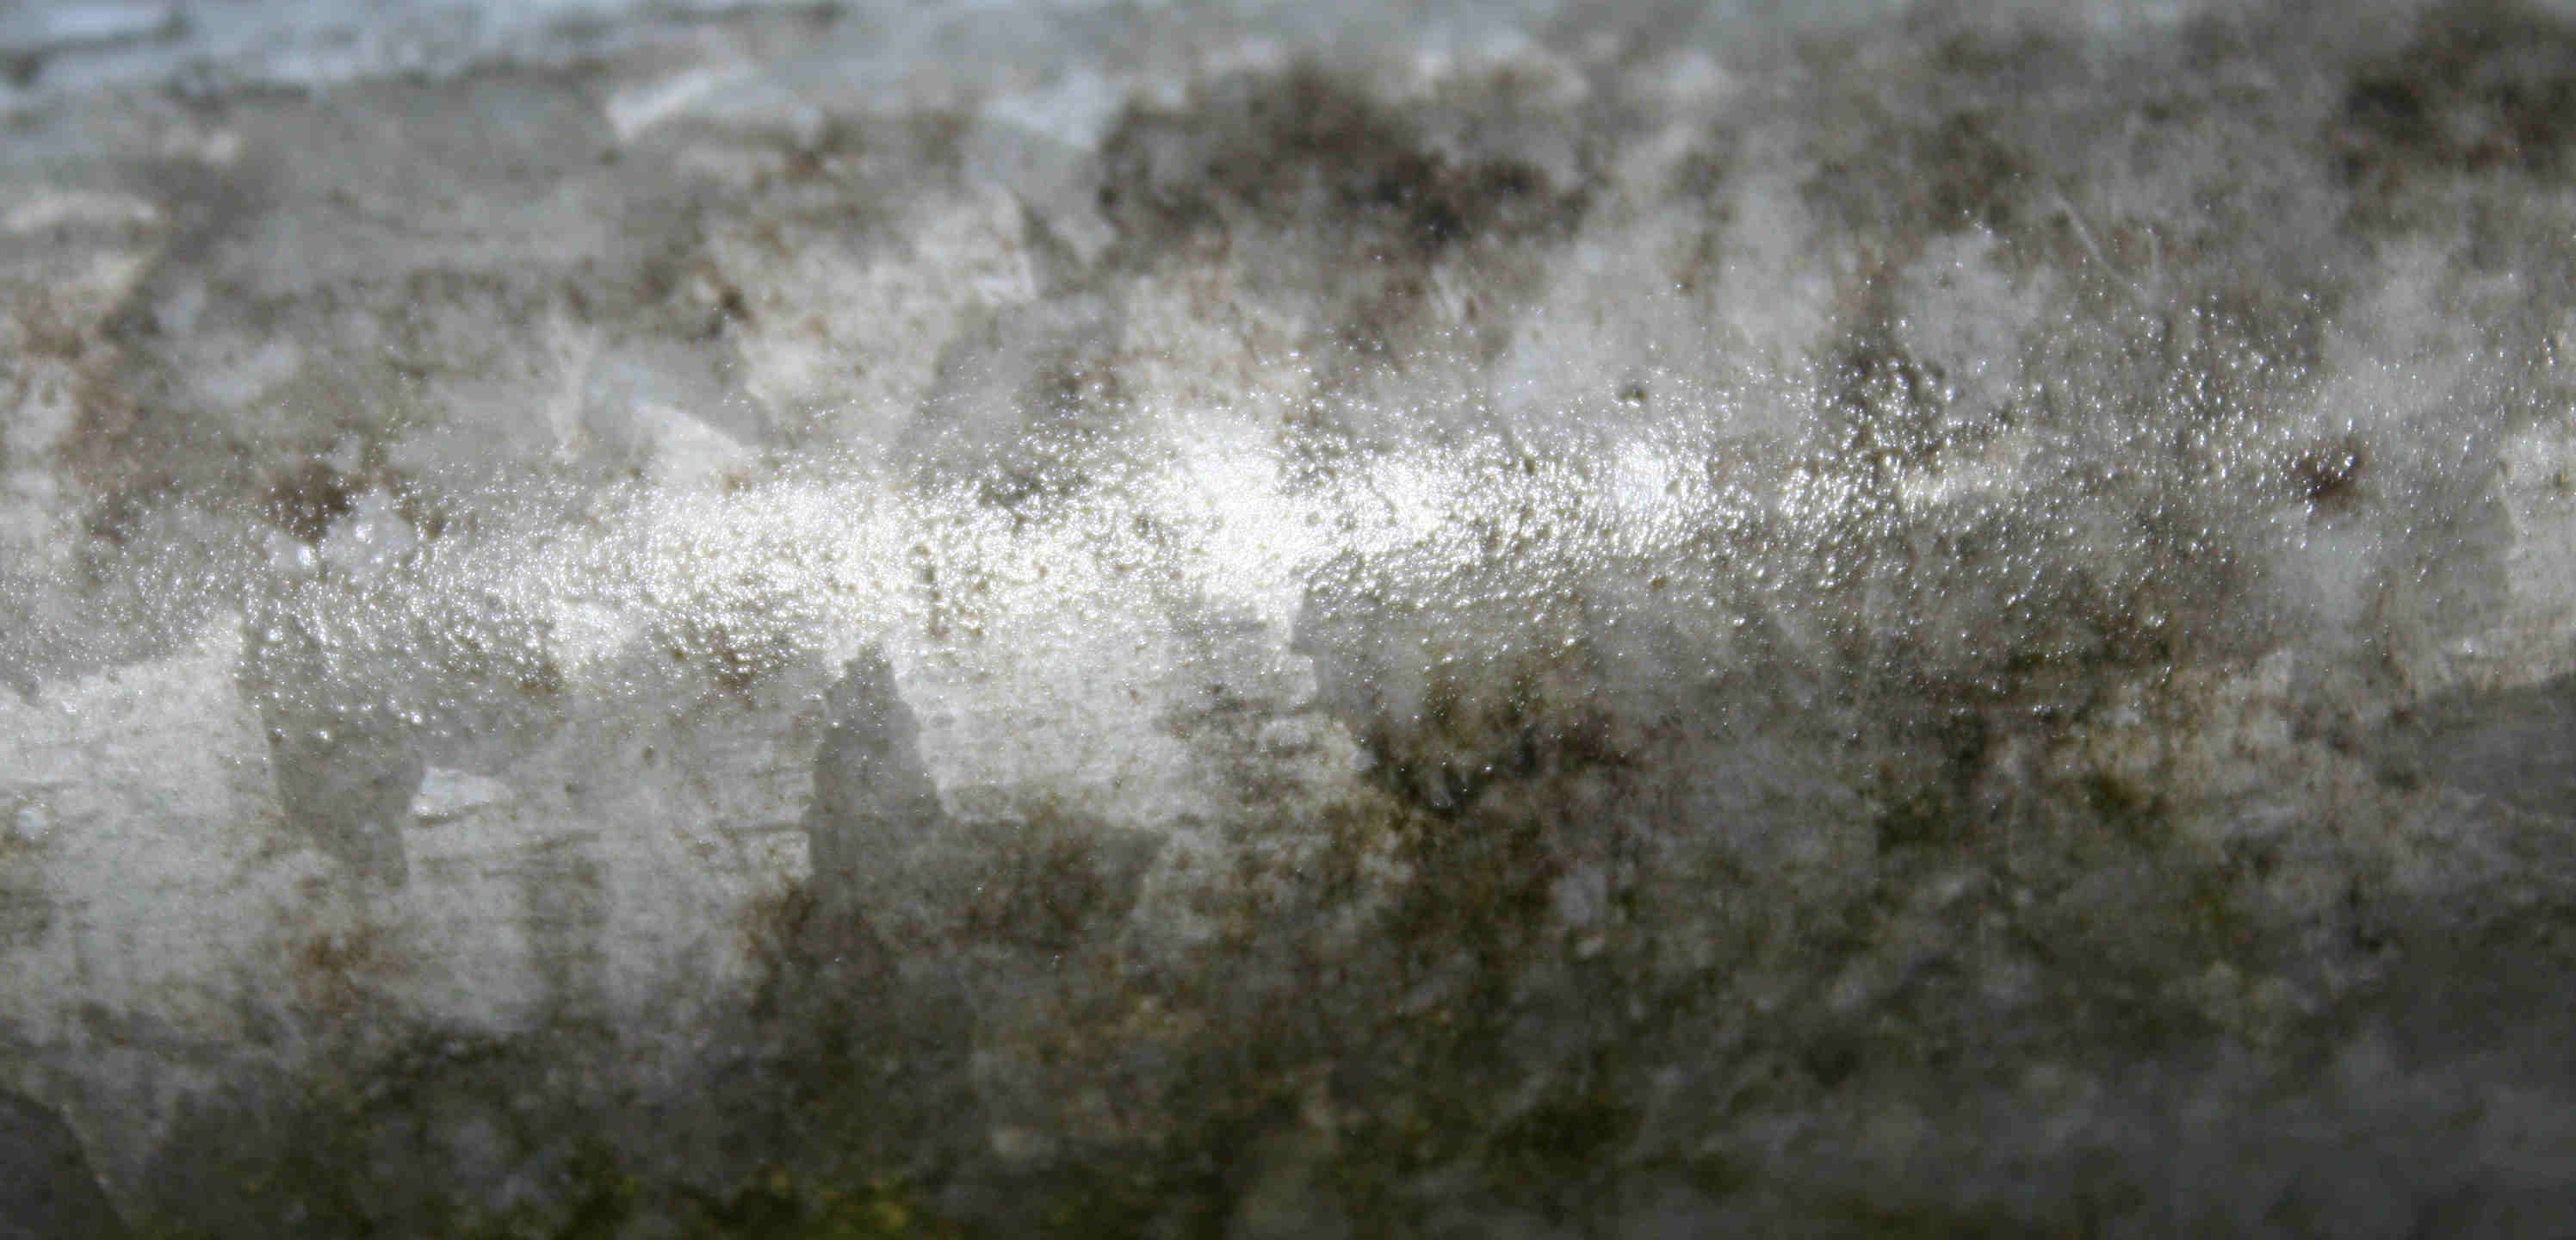 20 Distressed Wallpapers Images Pictures Freecreatives Afalchi Free images wallpape [afalchi.blogspot.com]